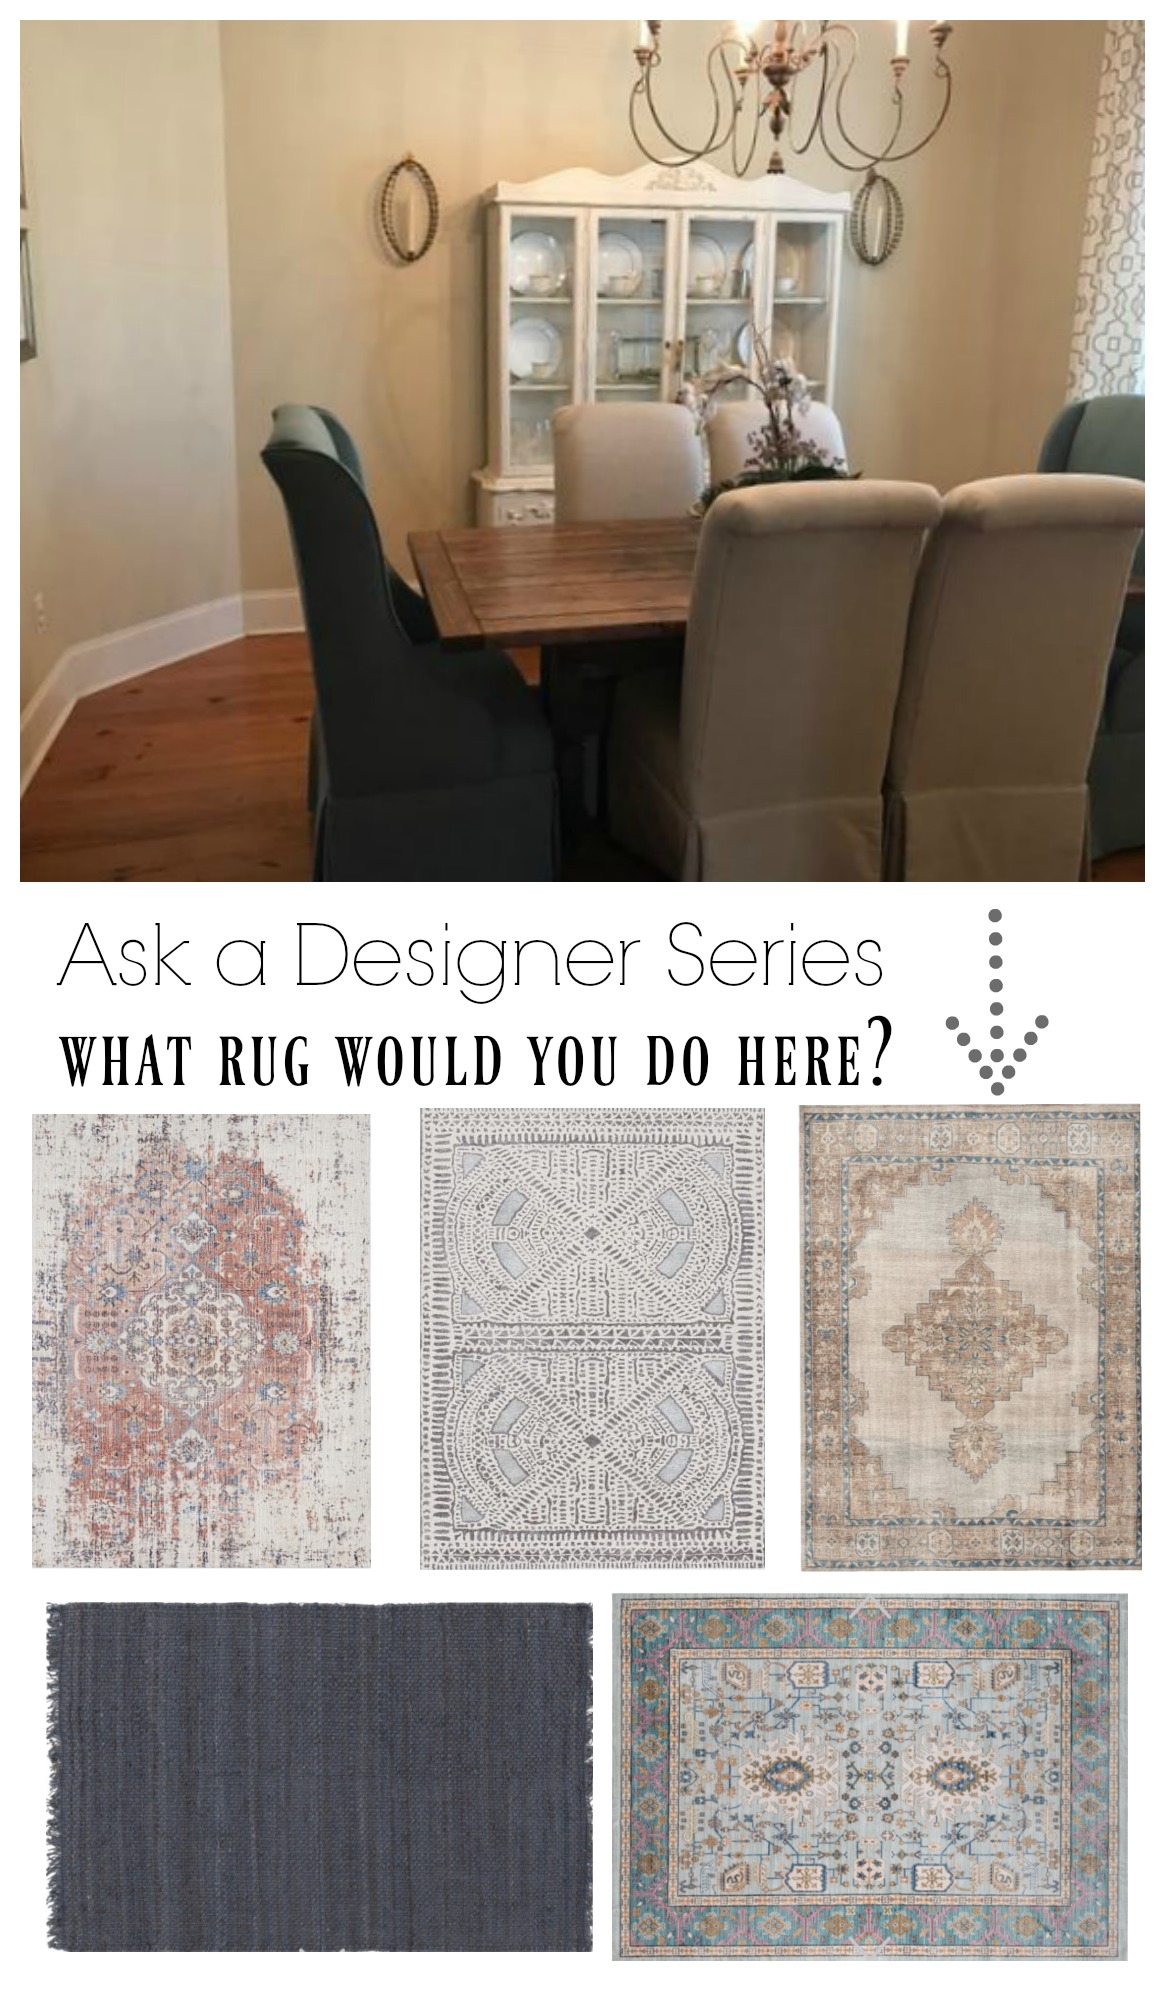 Ask a Designer Serires- What Rug would you do in this dining room?